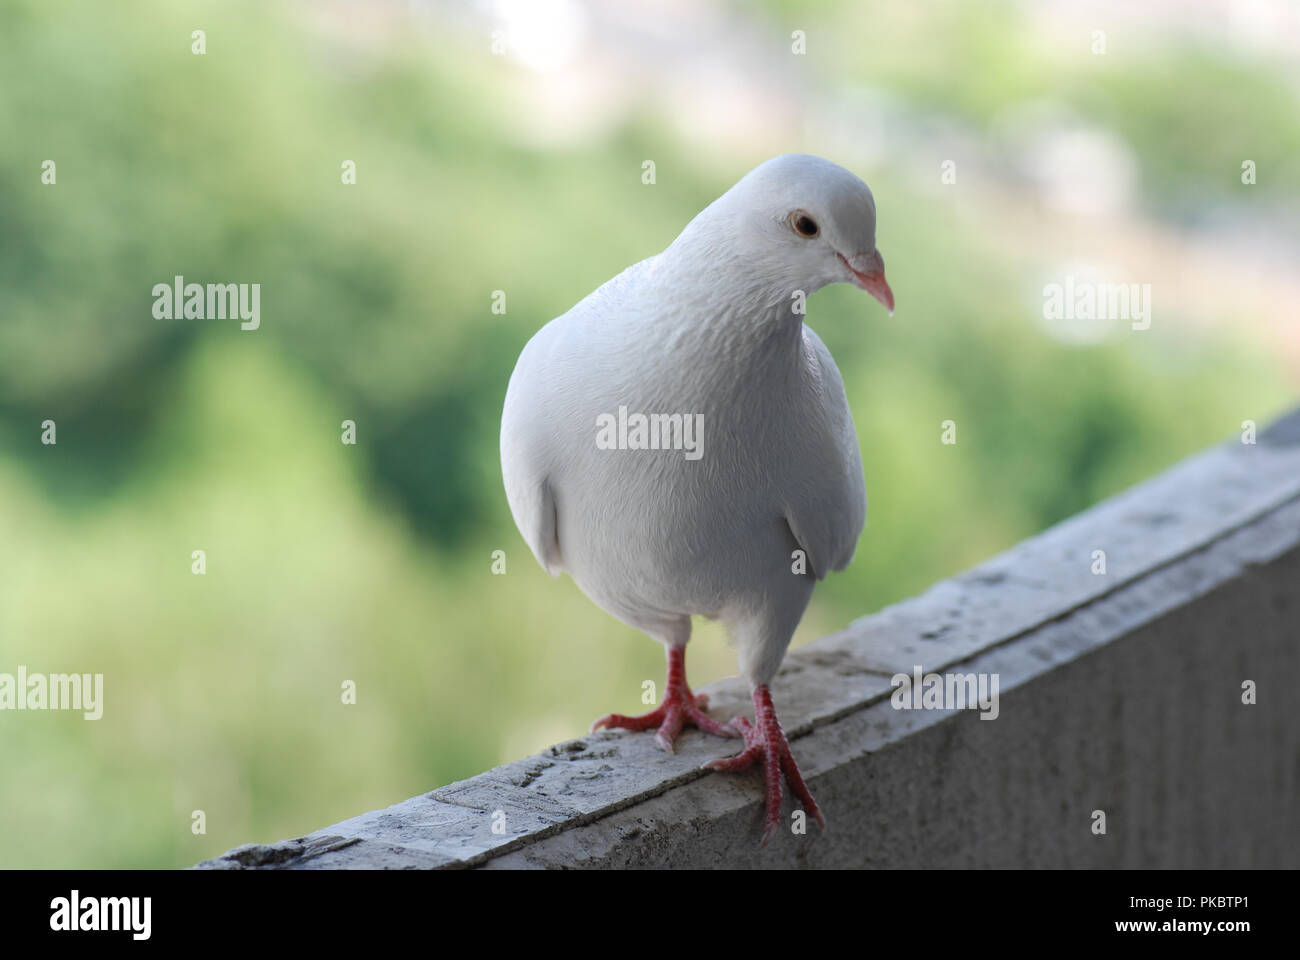 Proud white pigeon on a balcony over blurred green street background Stock Photo